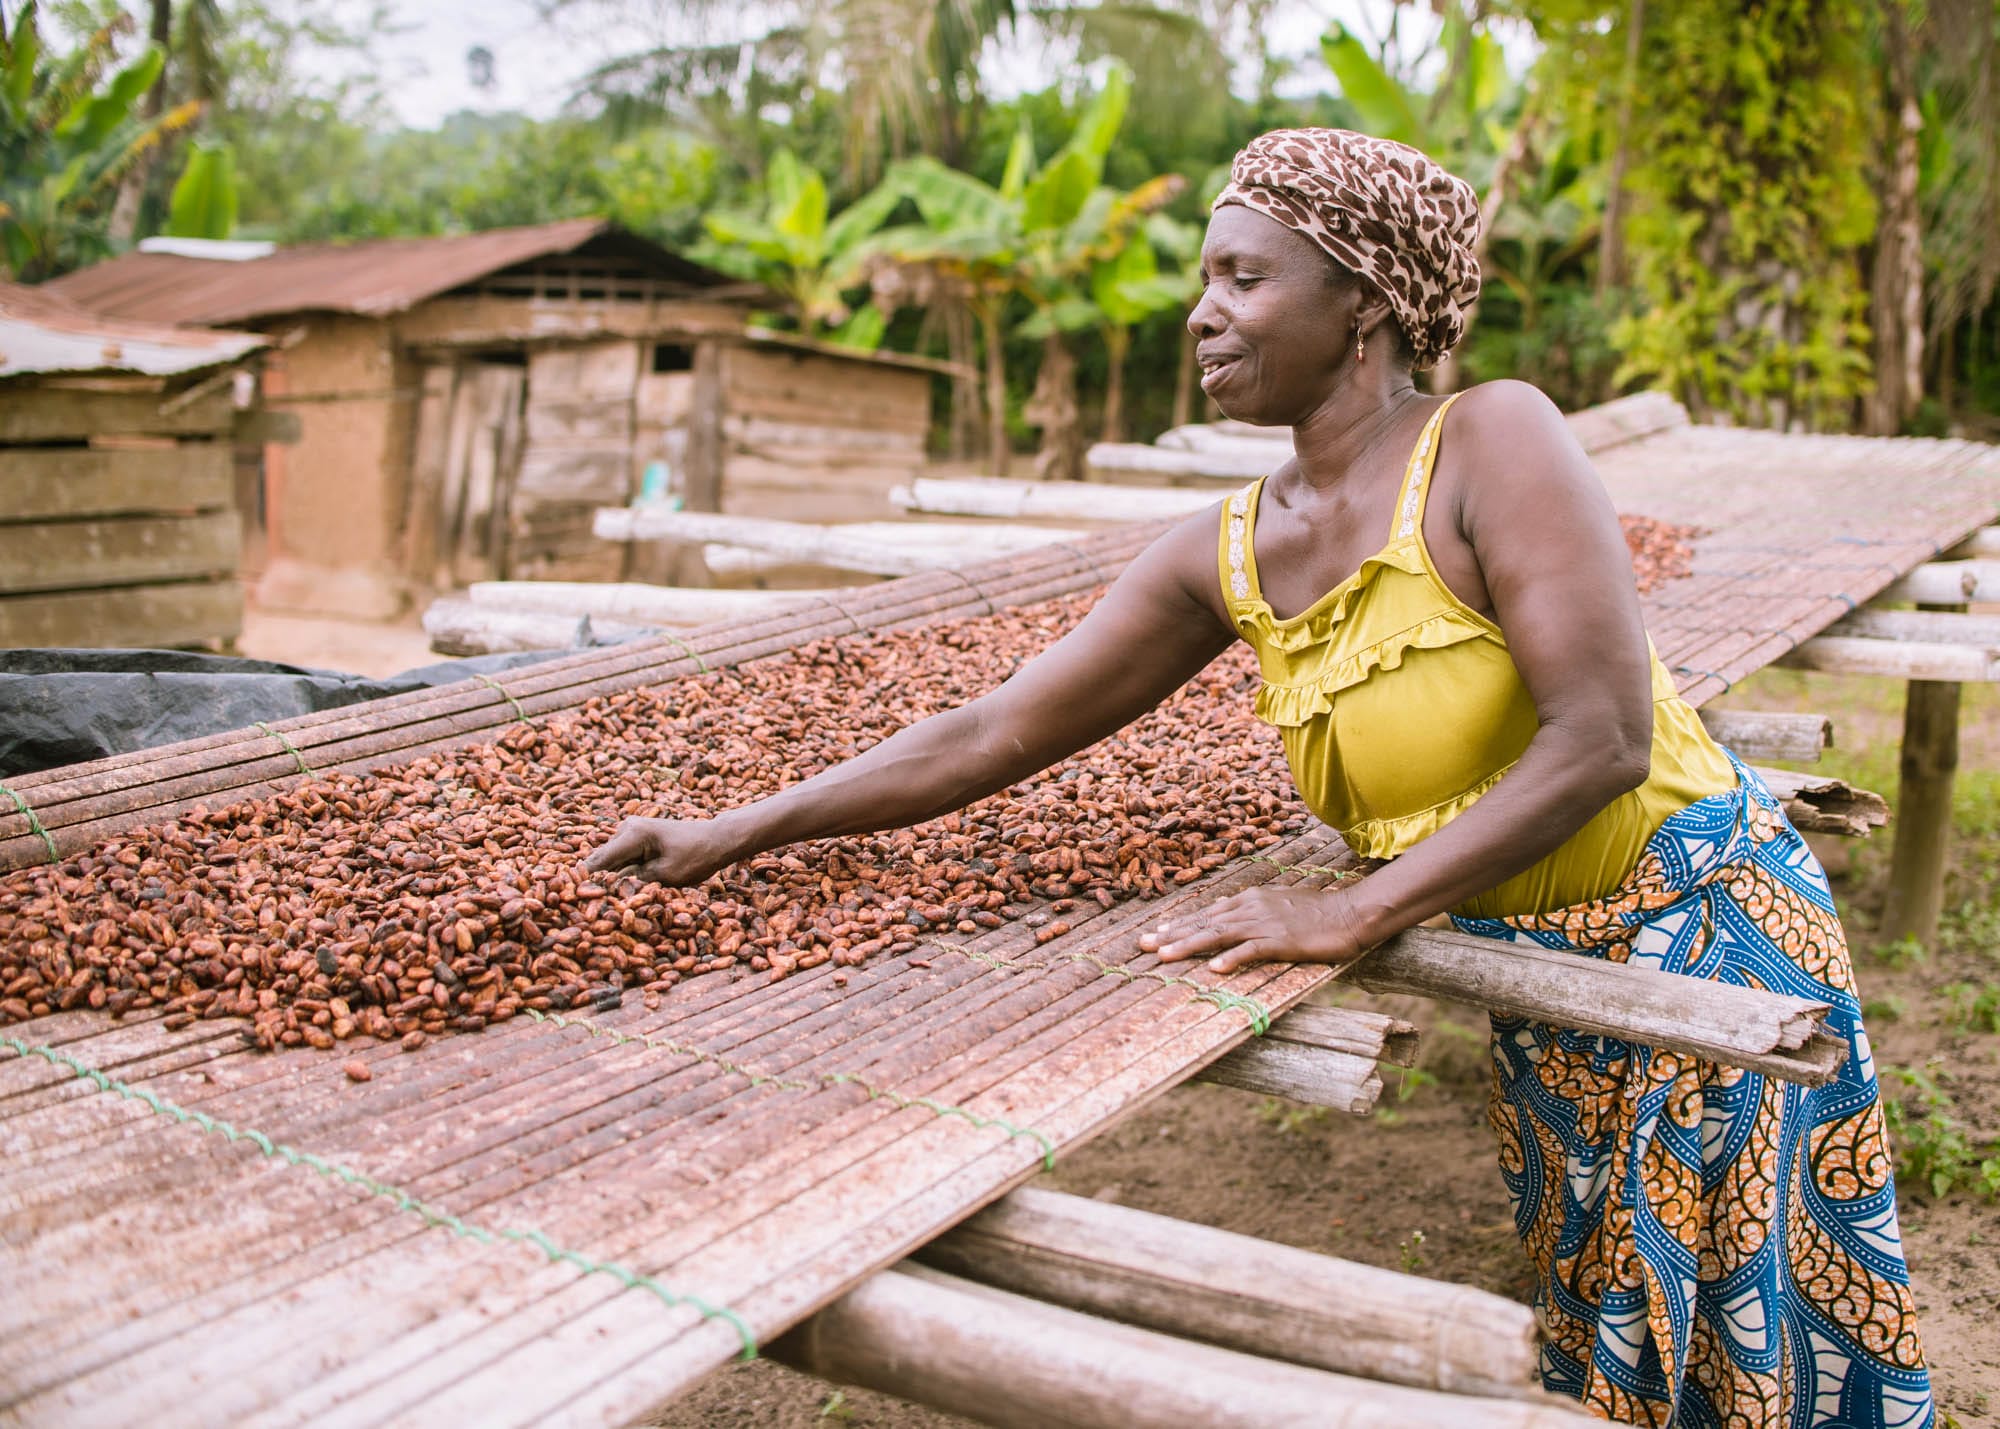 Women separating cocoa beans